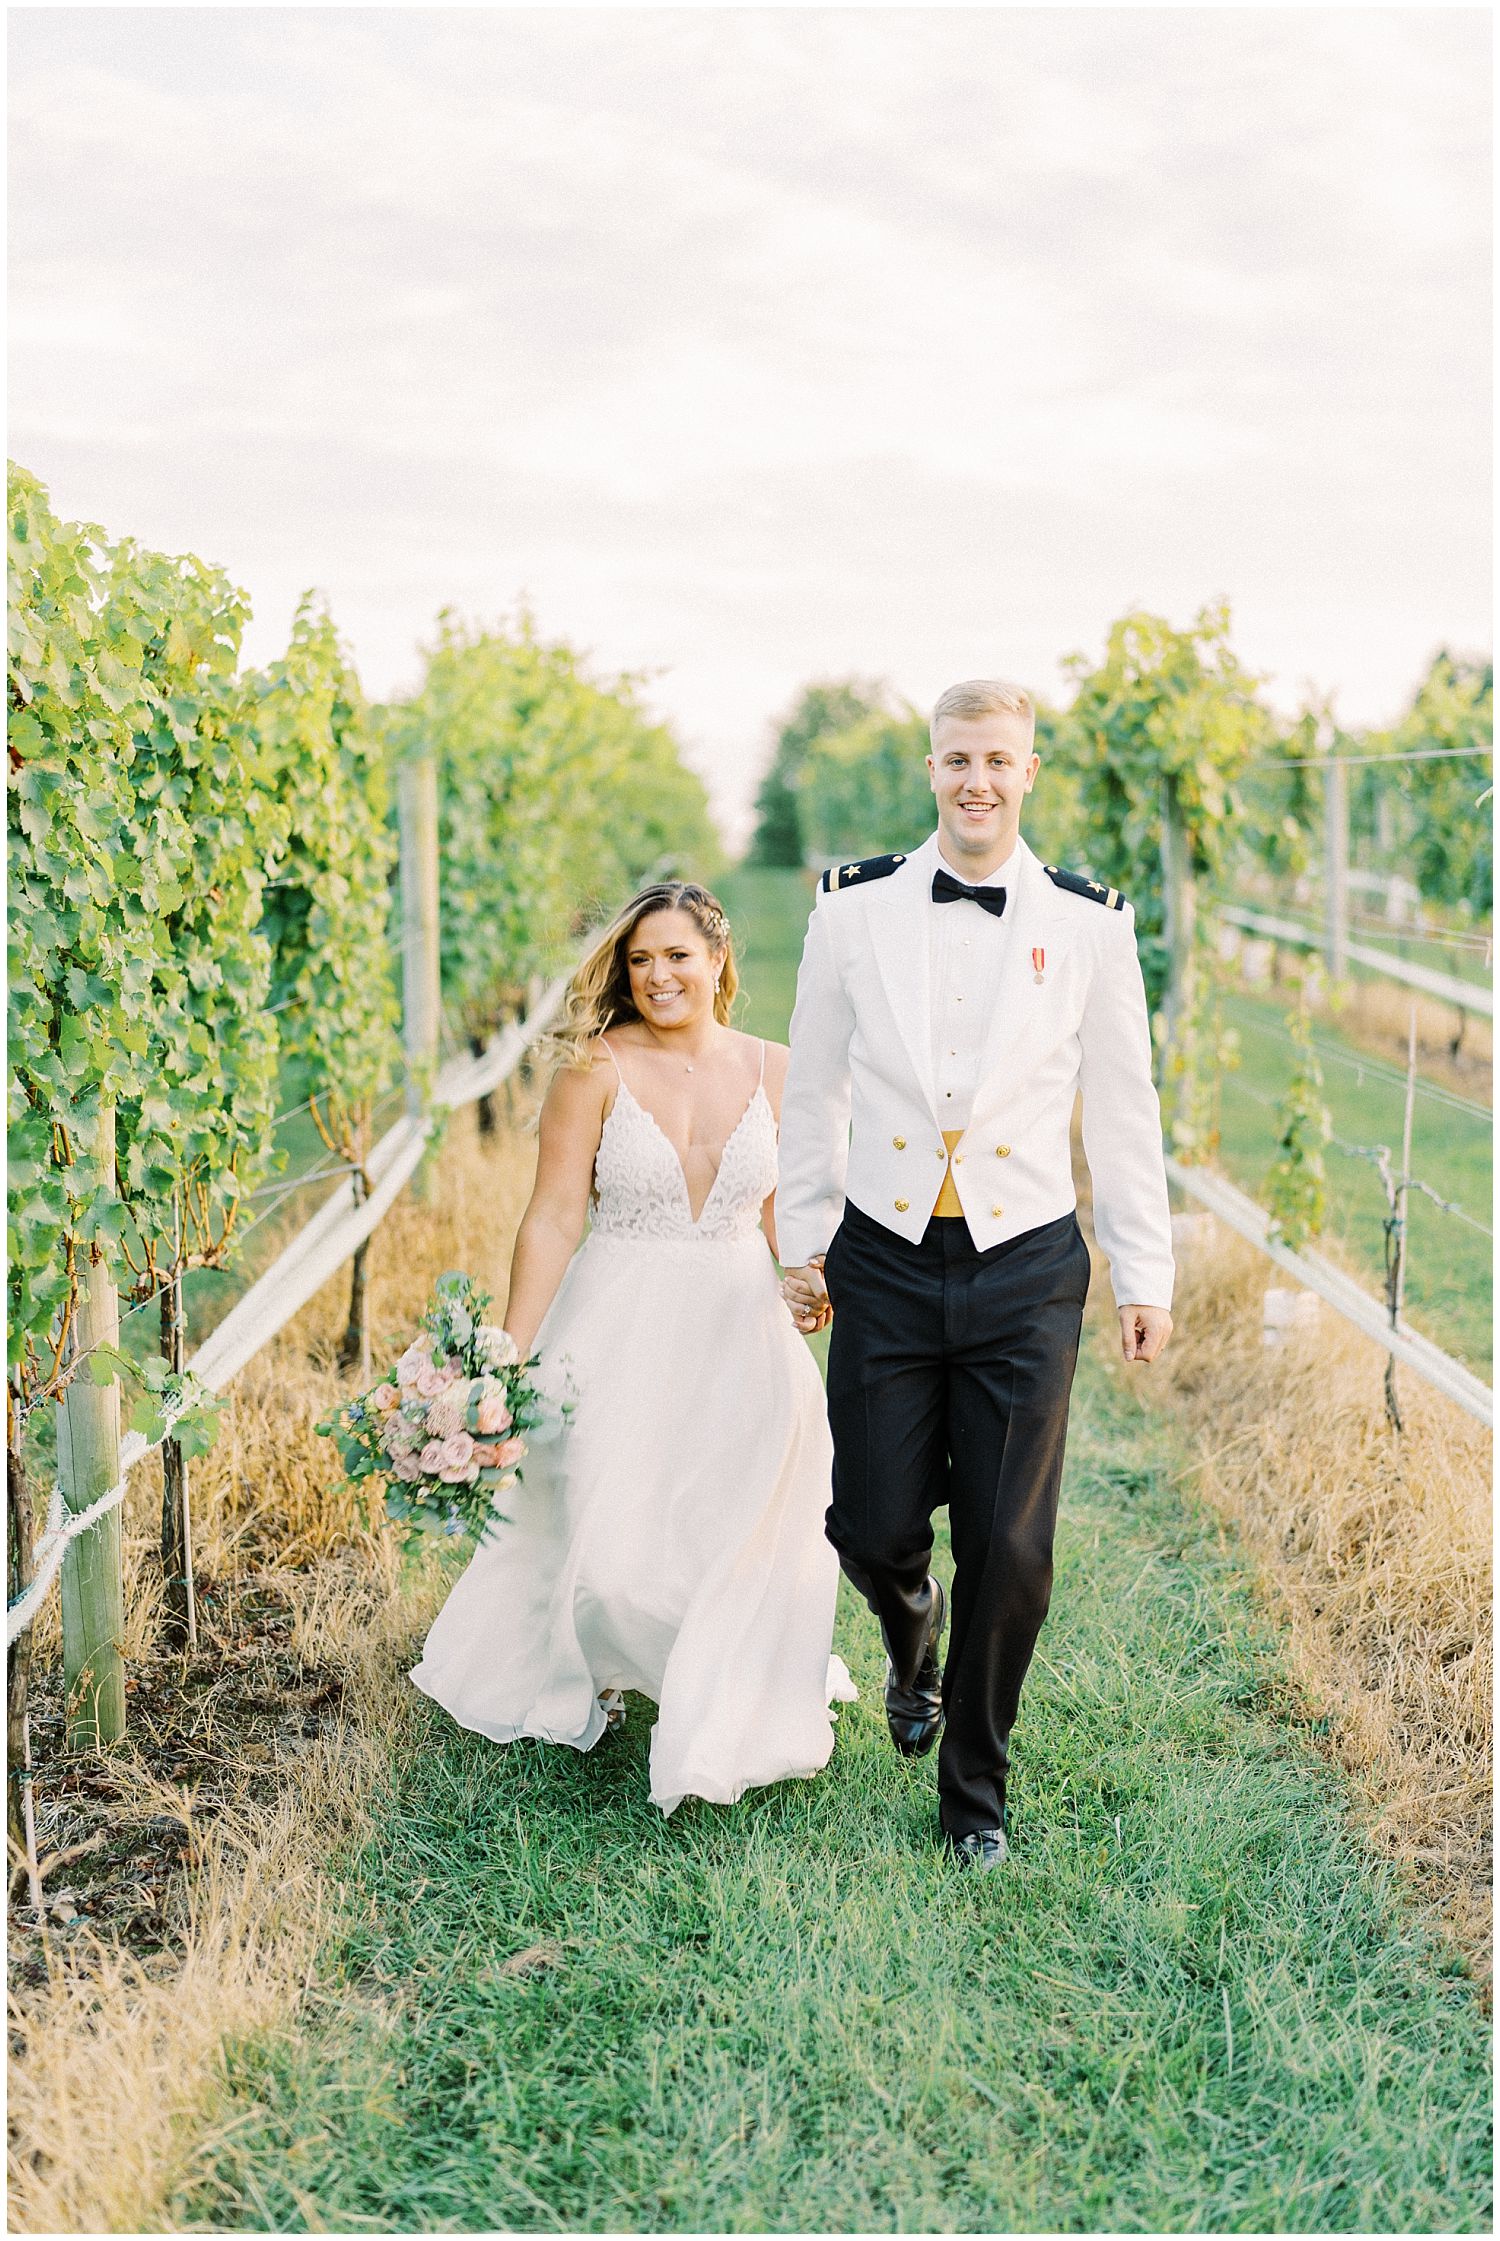 Wedding photography in vineyards at 8 Chains North Winery